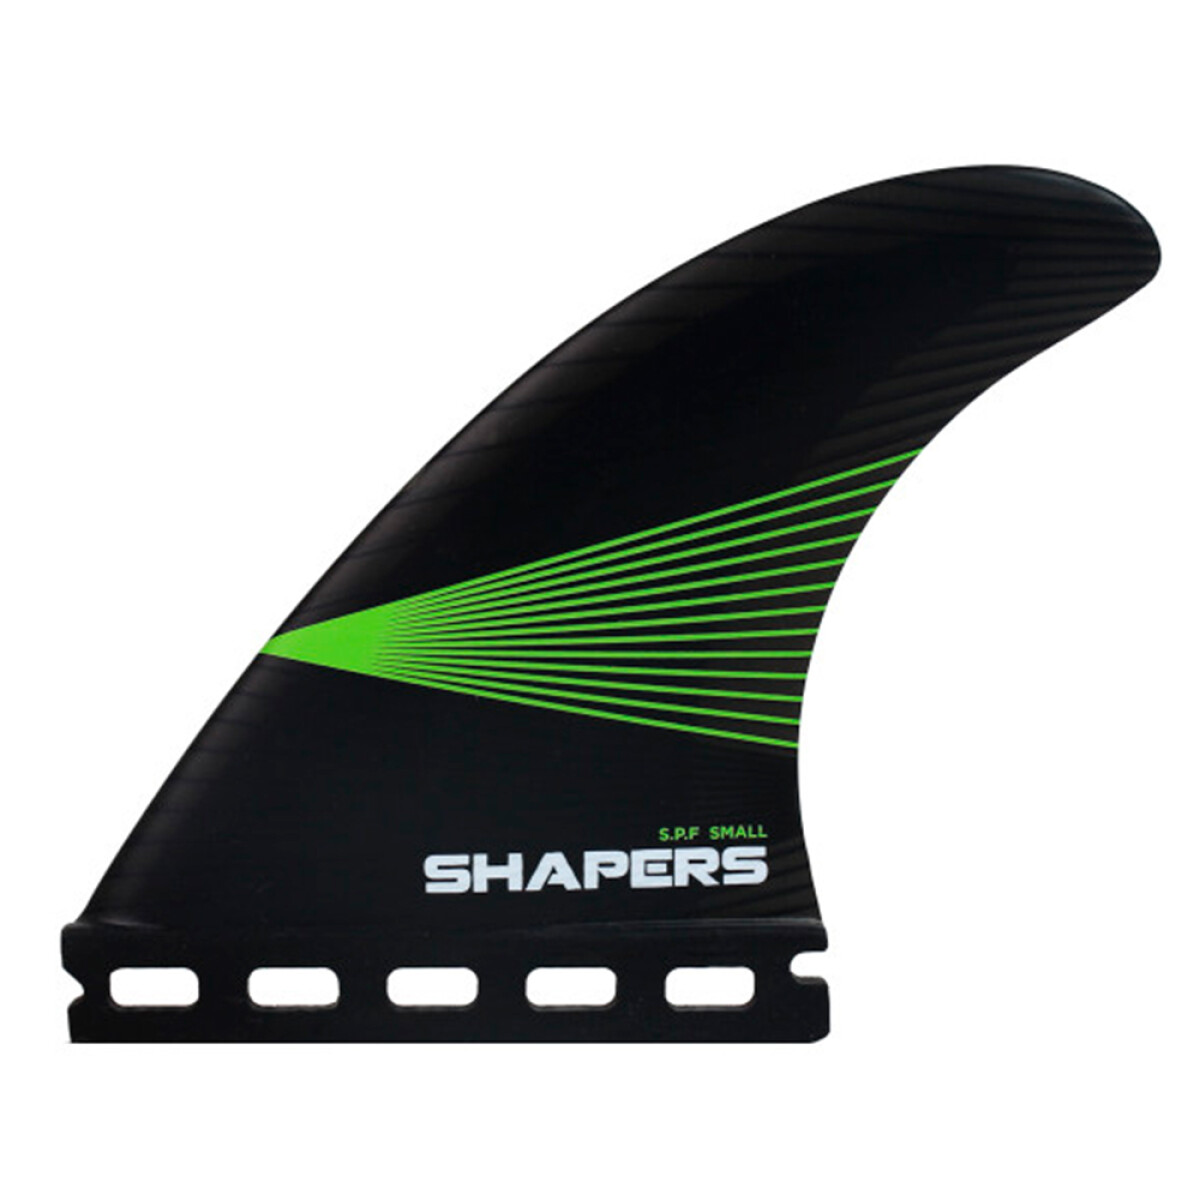 Quilla Shapers S.P.F. Airlite Small (Futures) 